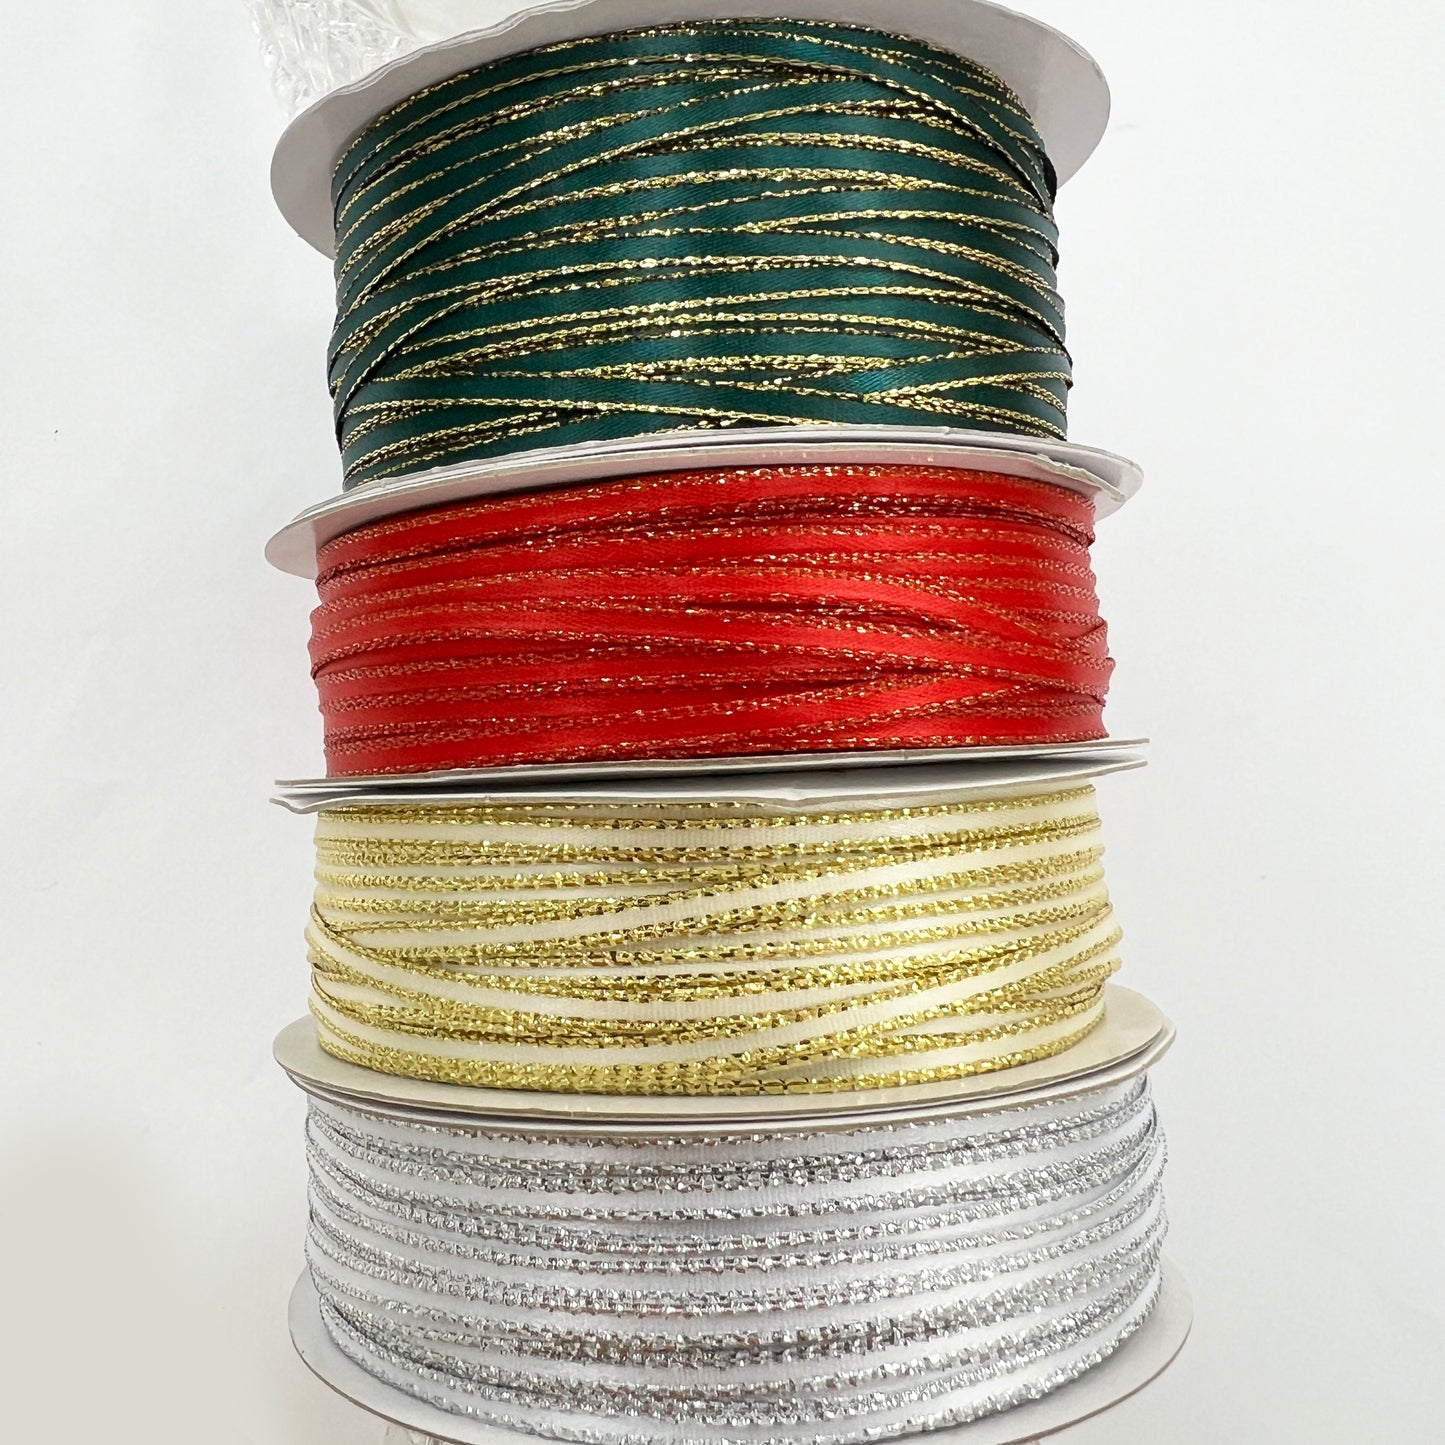 3mm Metallic Edge Satin Ribbon | 25m Roll Gold Silver Green Red |  Decorations Wrapping - SweetpeaStore